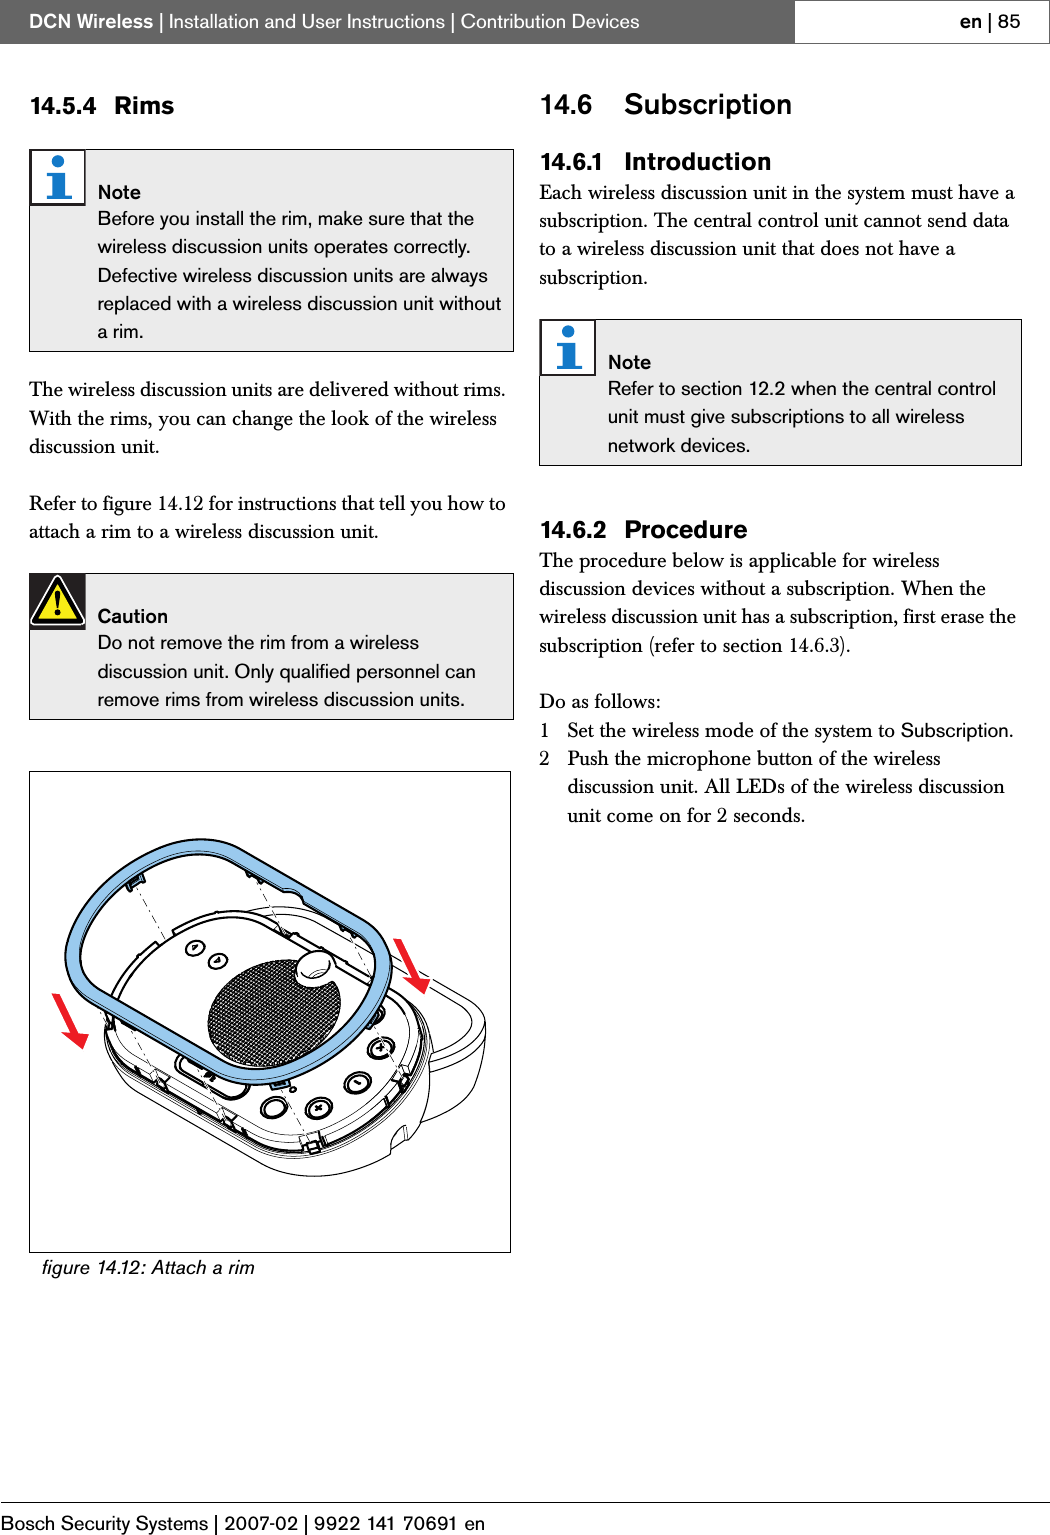 Page 56 of Bosch Security Systems DCNWAP Wireless Access Point User Manual Part 2